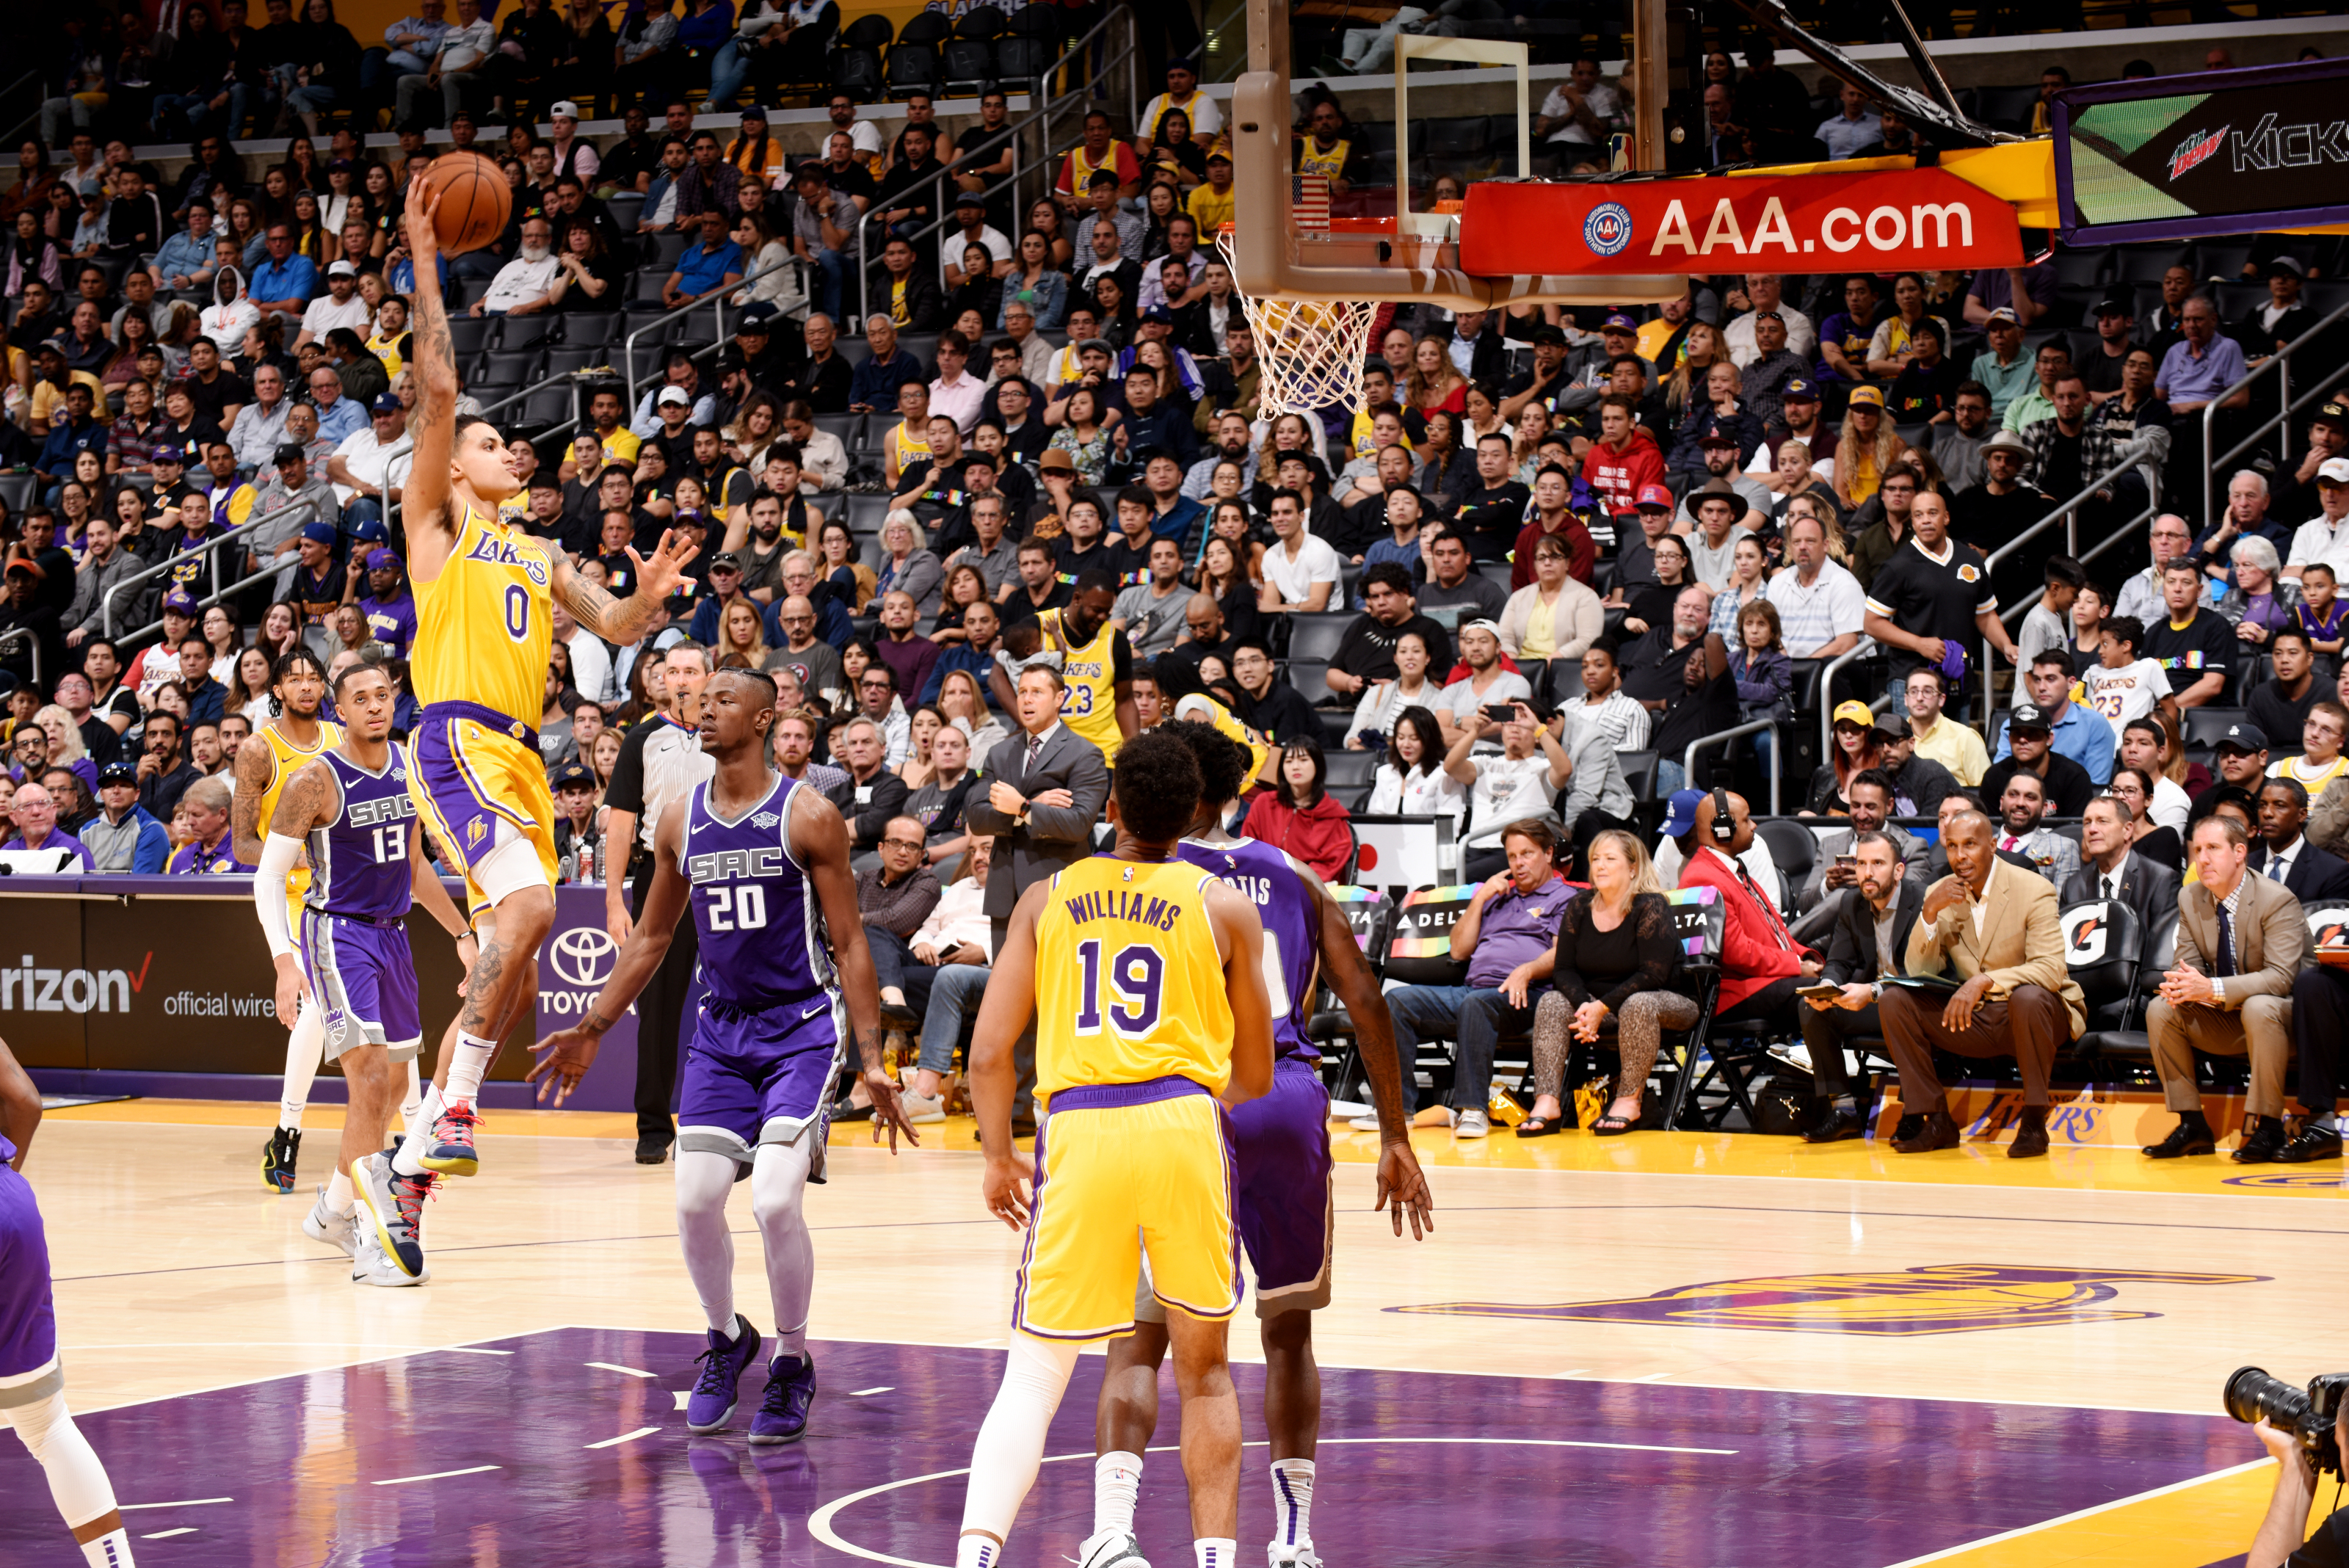 Los Angeles Lakers vs Sacramento Kings Game 12 preview, live stream